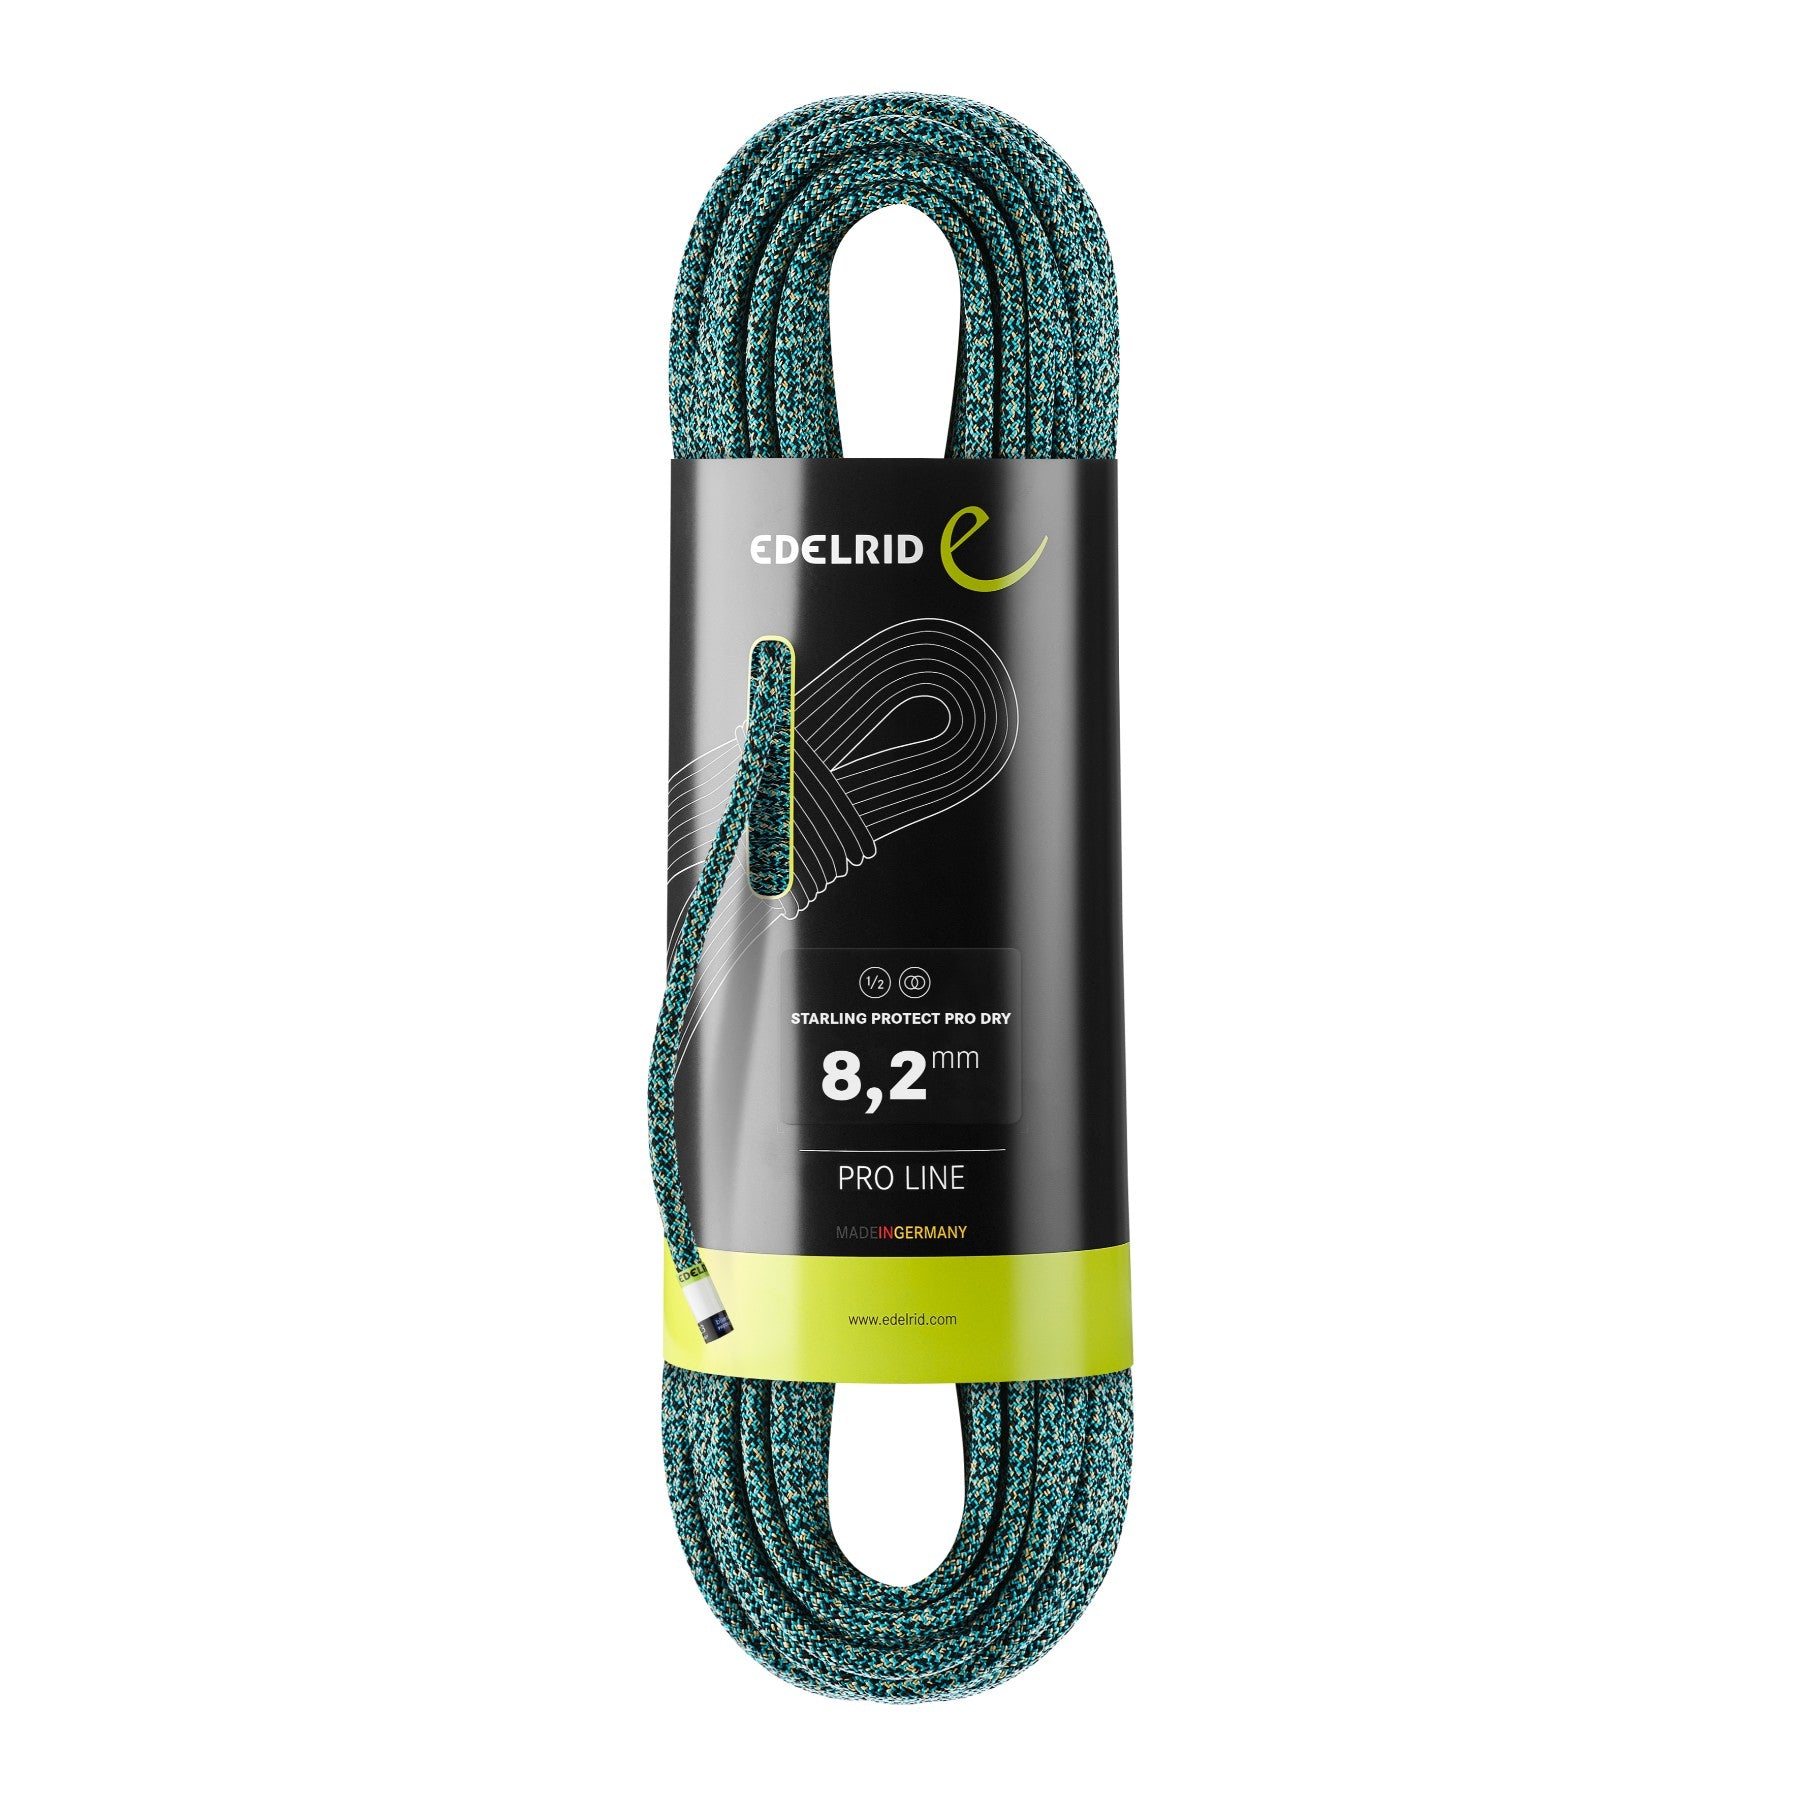 Edelrid Starling Protect Pro Dry 8.2mm x 50m, Colour Yellow-Night